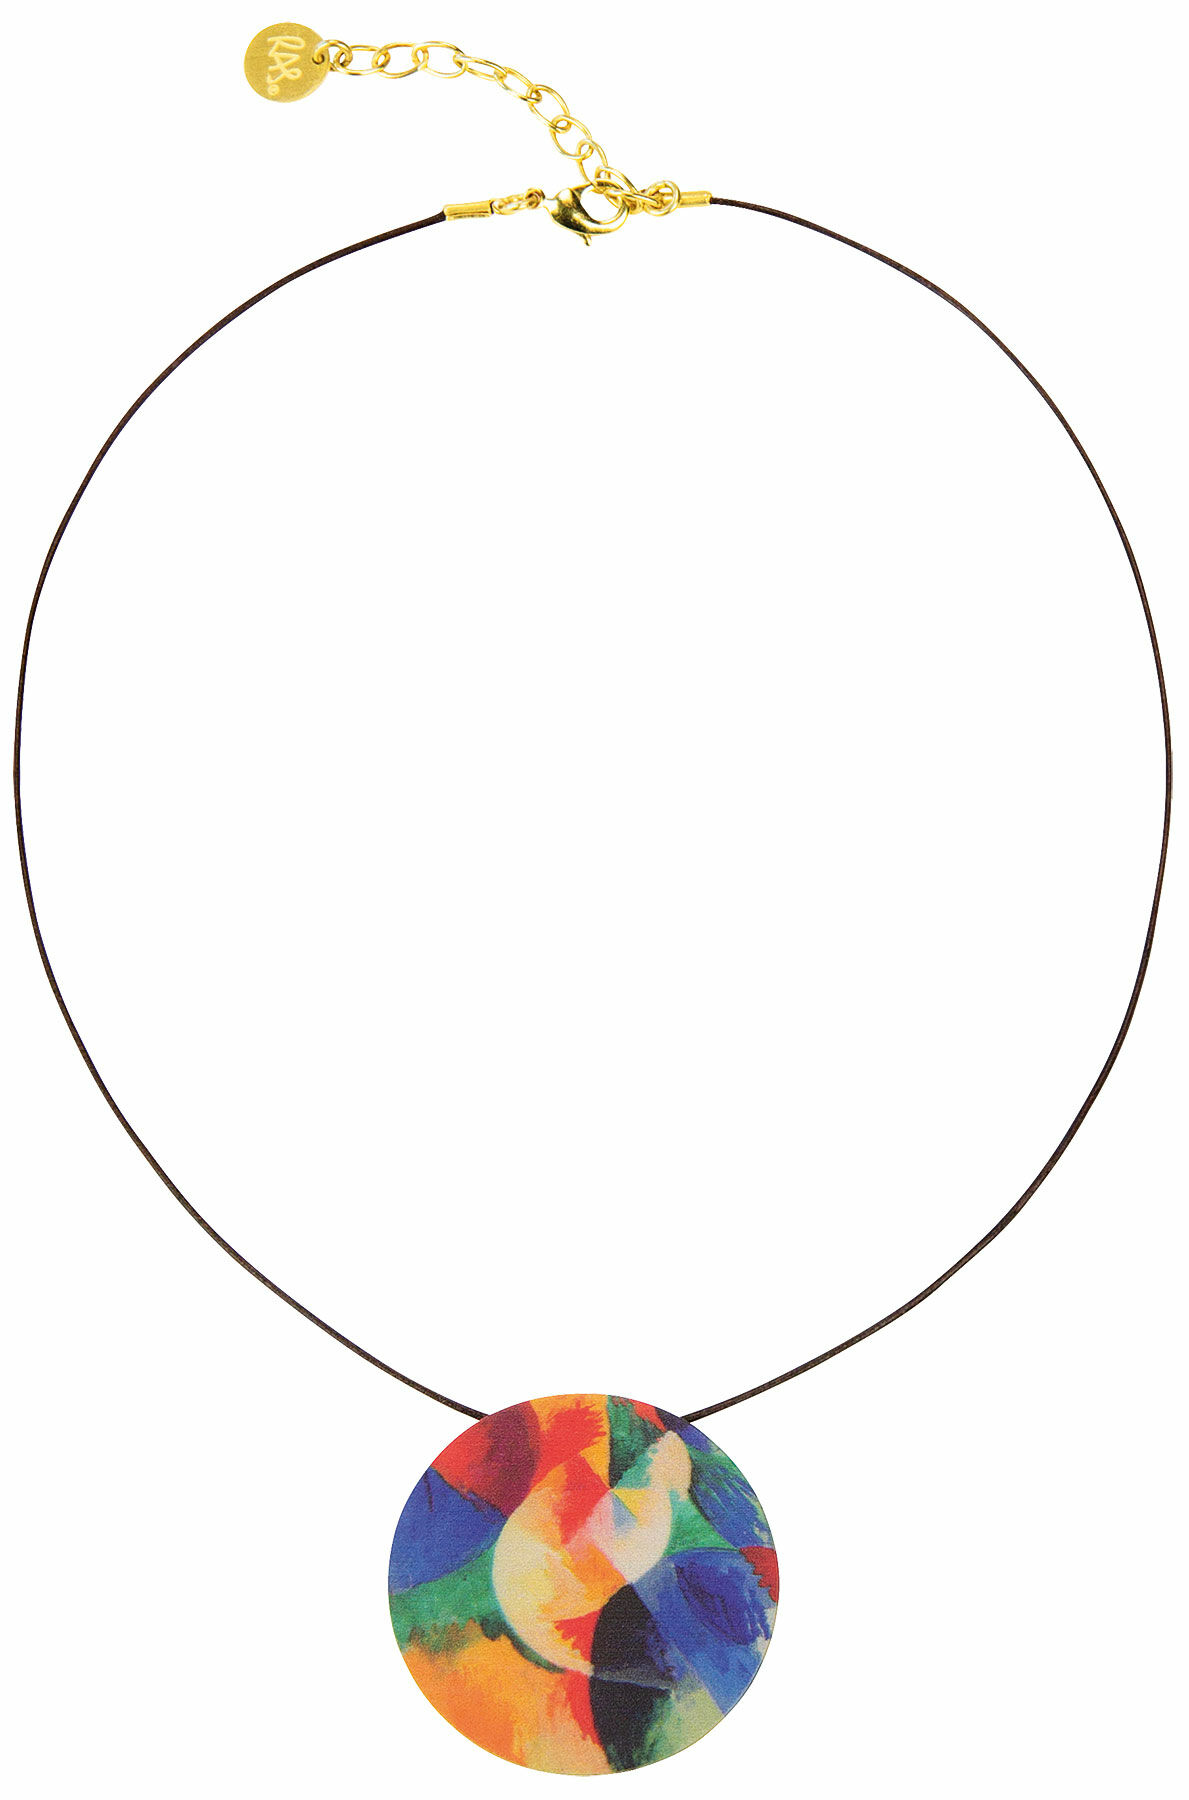 Necklace "Circle Shapes, Sun" with leather cord by Robert Delaunay